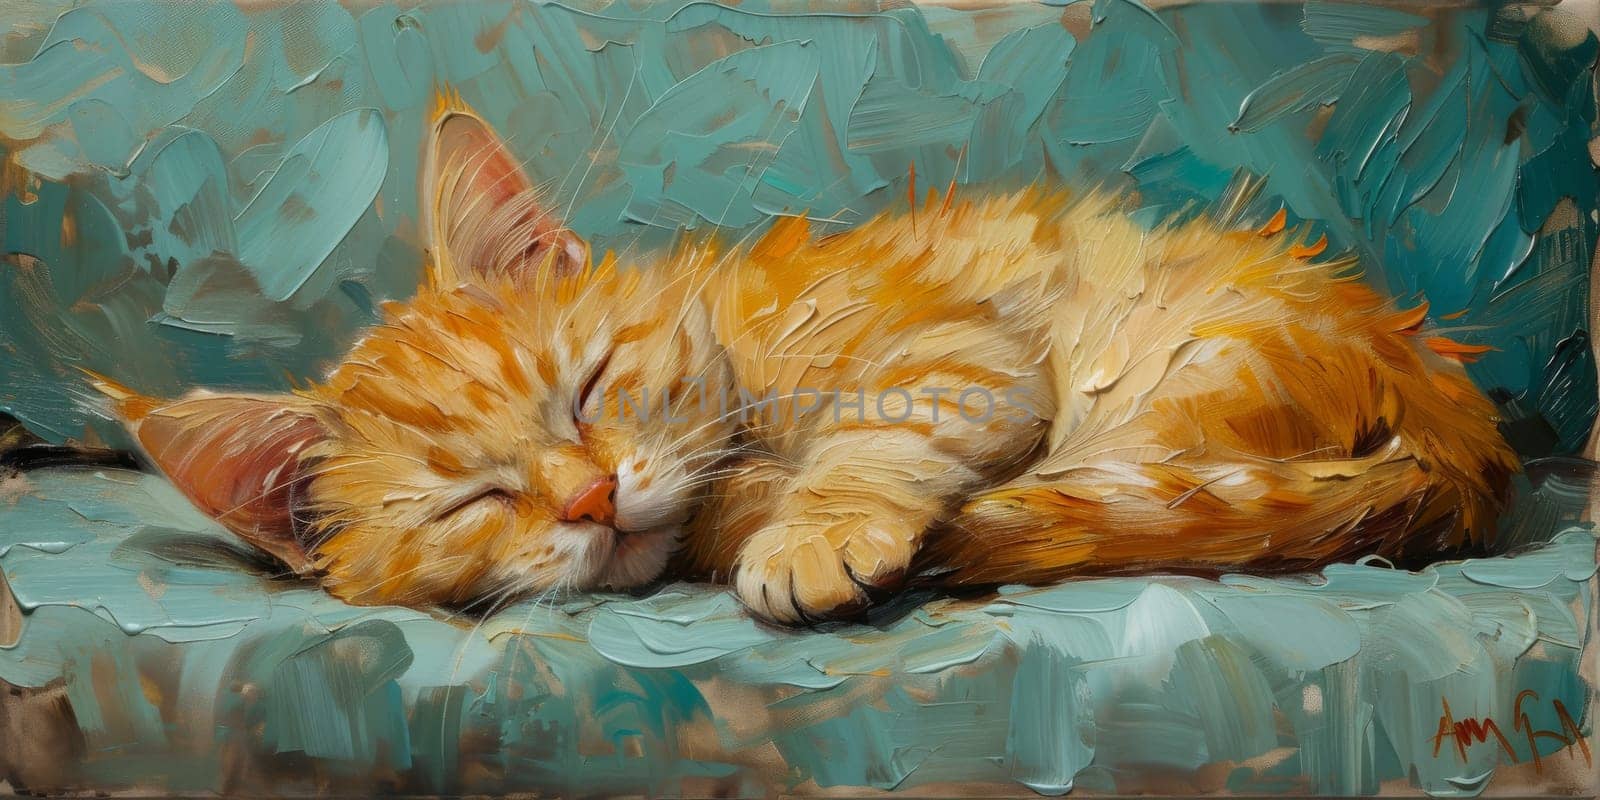 Oil cat portrait painting in multicolored tones. Conceptual abstract painting. Closeup painting oil and palette knife on canvas